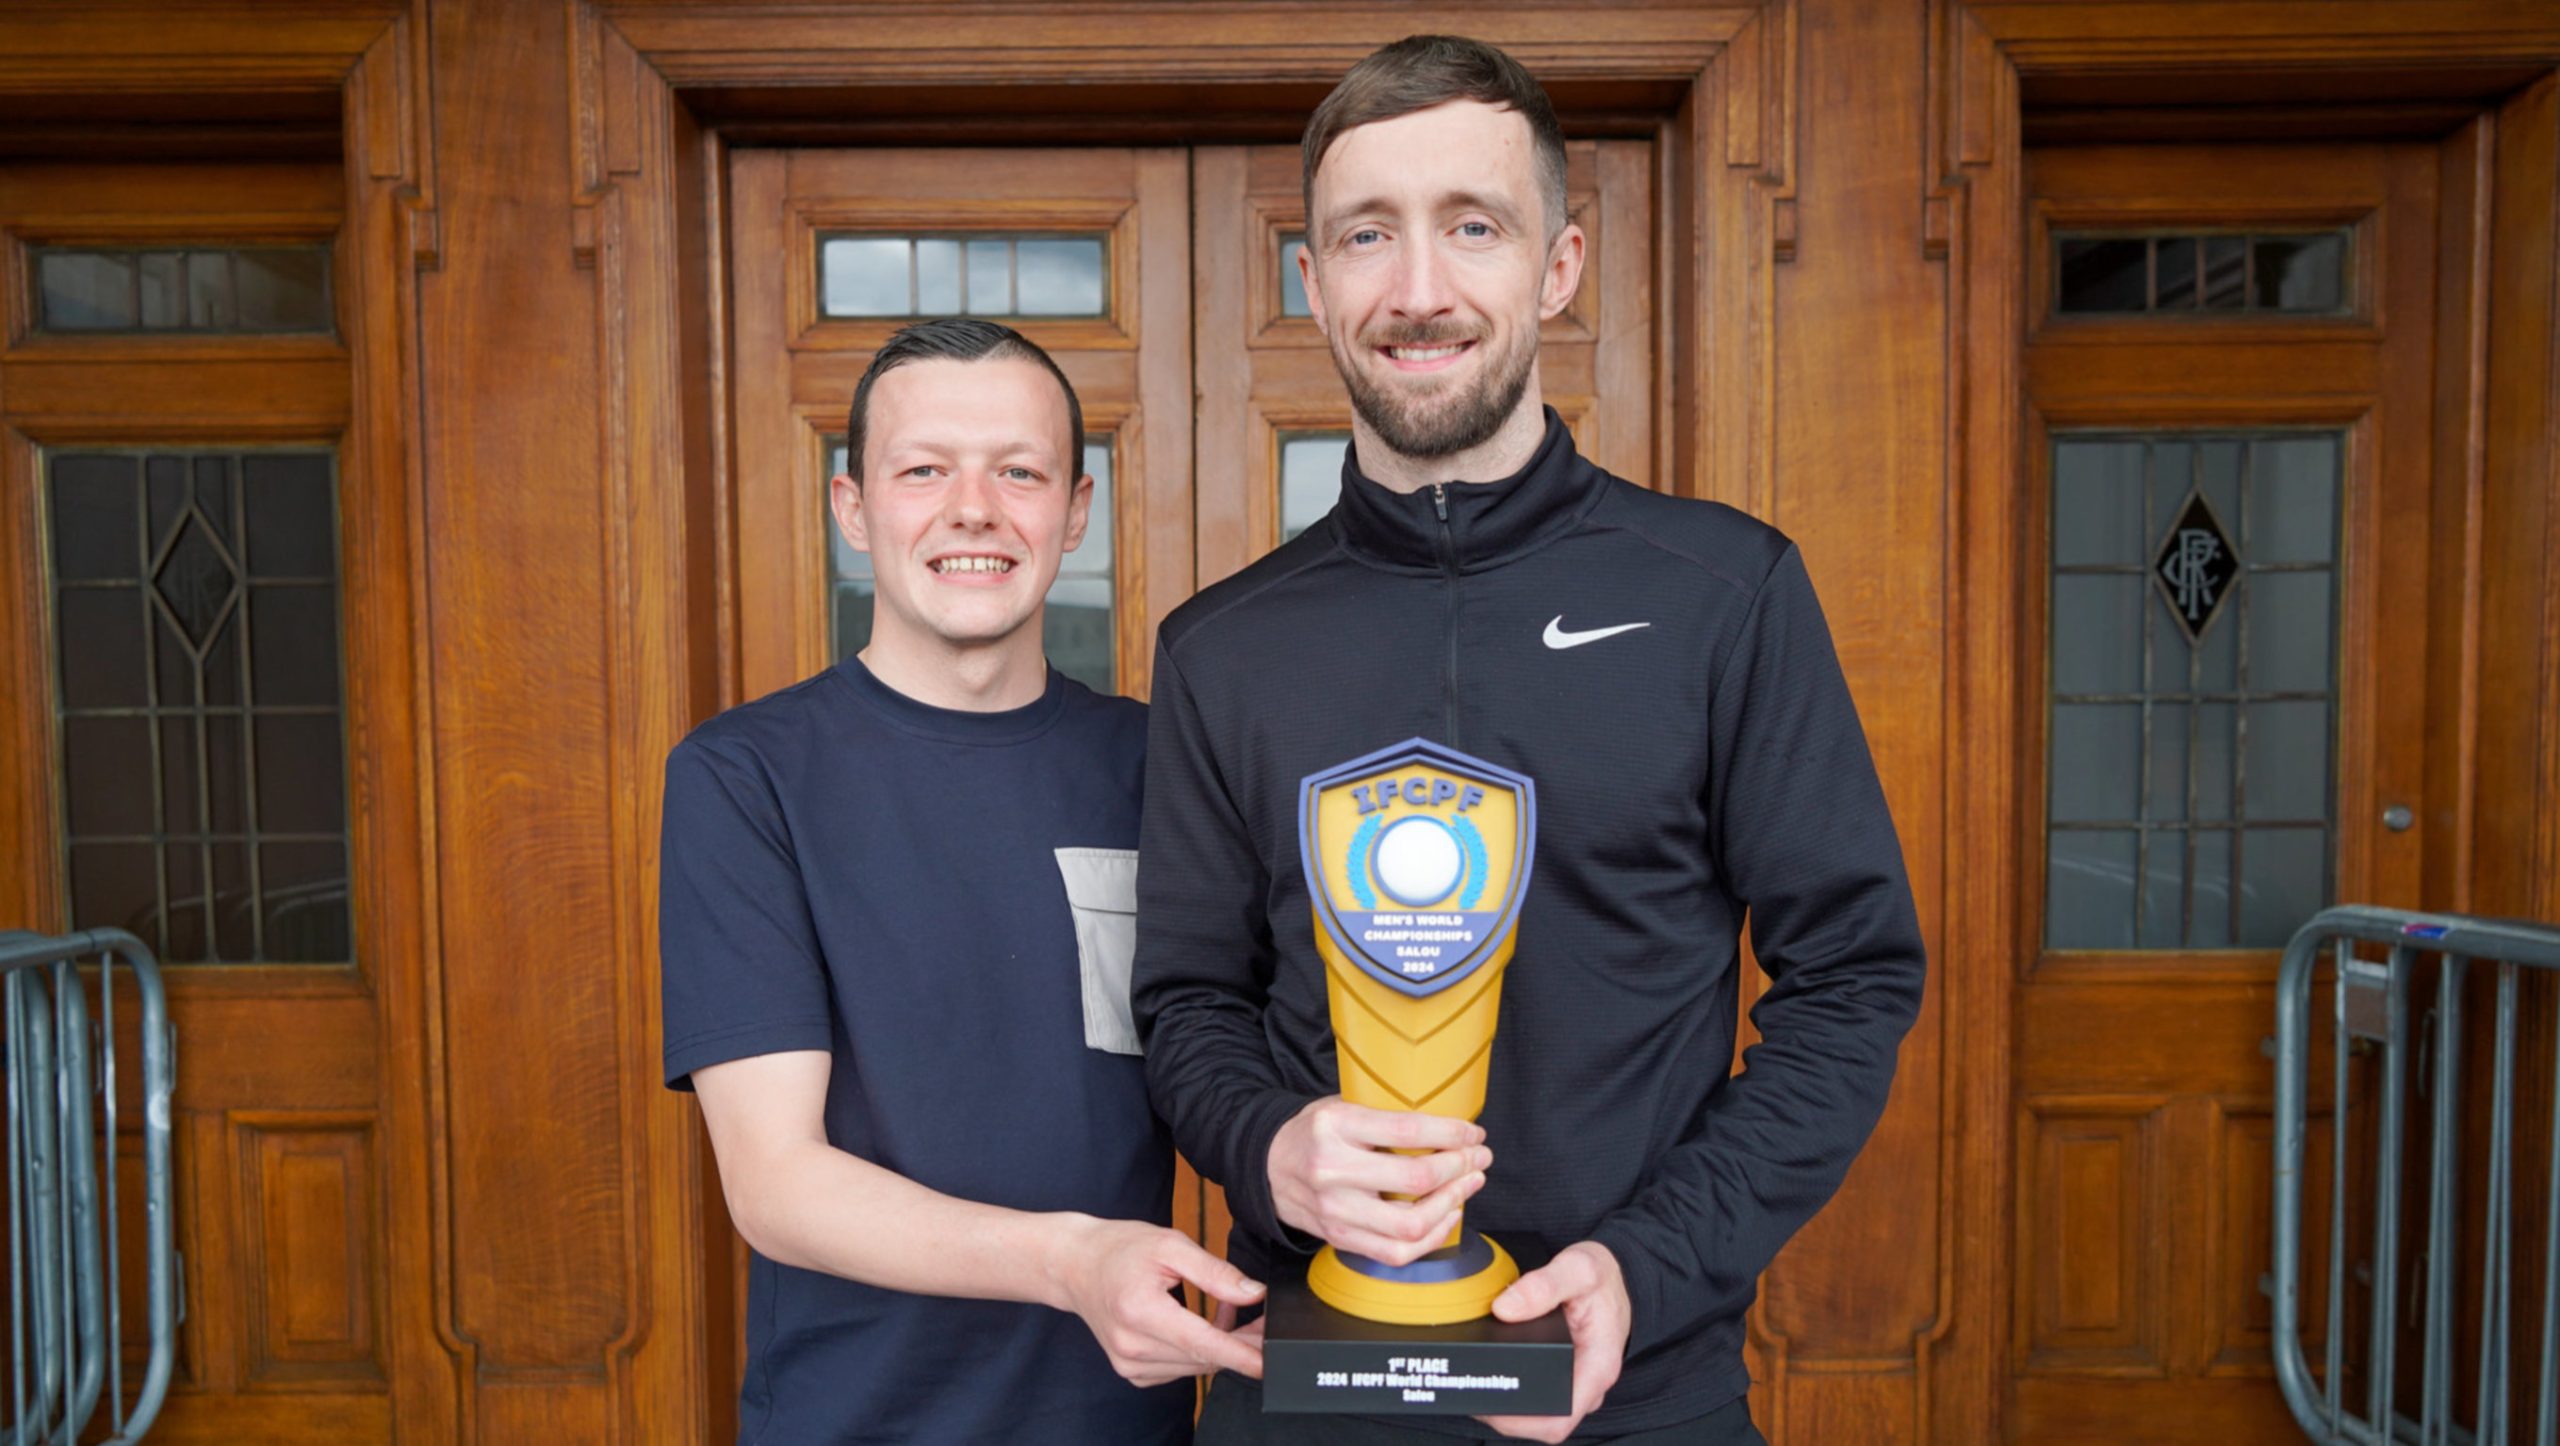 Foundation hosts Scotland Cerebral Palsy football team at Ibrox after historic first World Championship victory